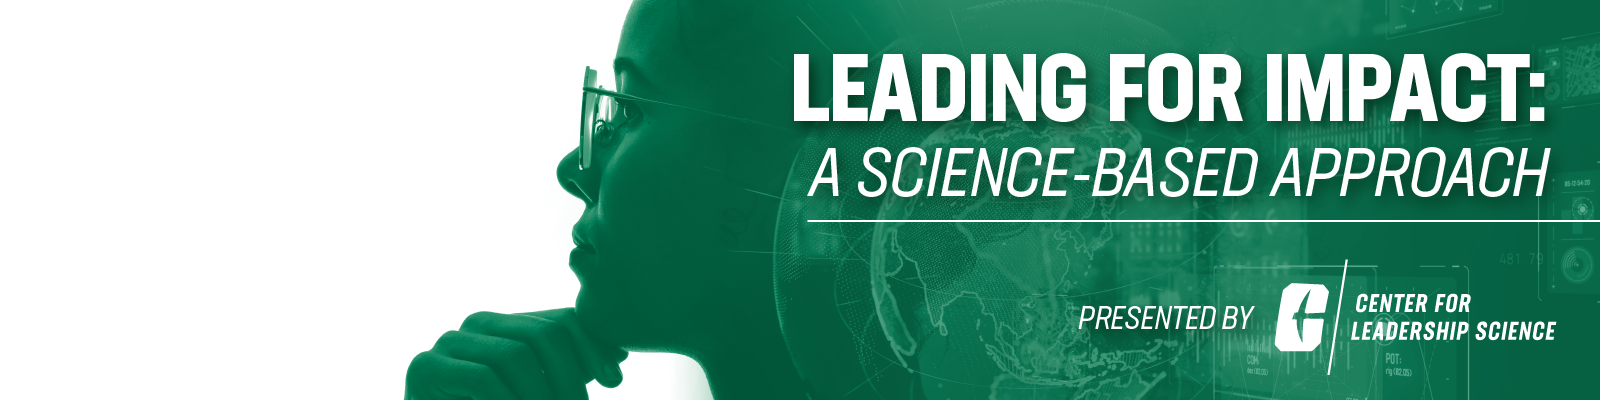 Leading for Impact: A Science-Based Approach